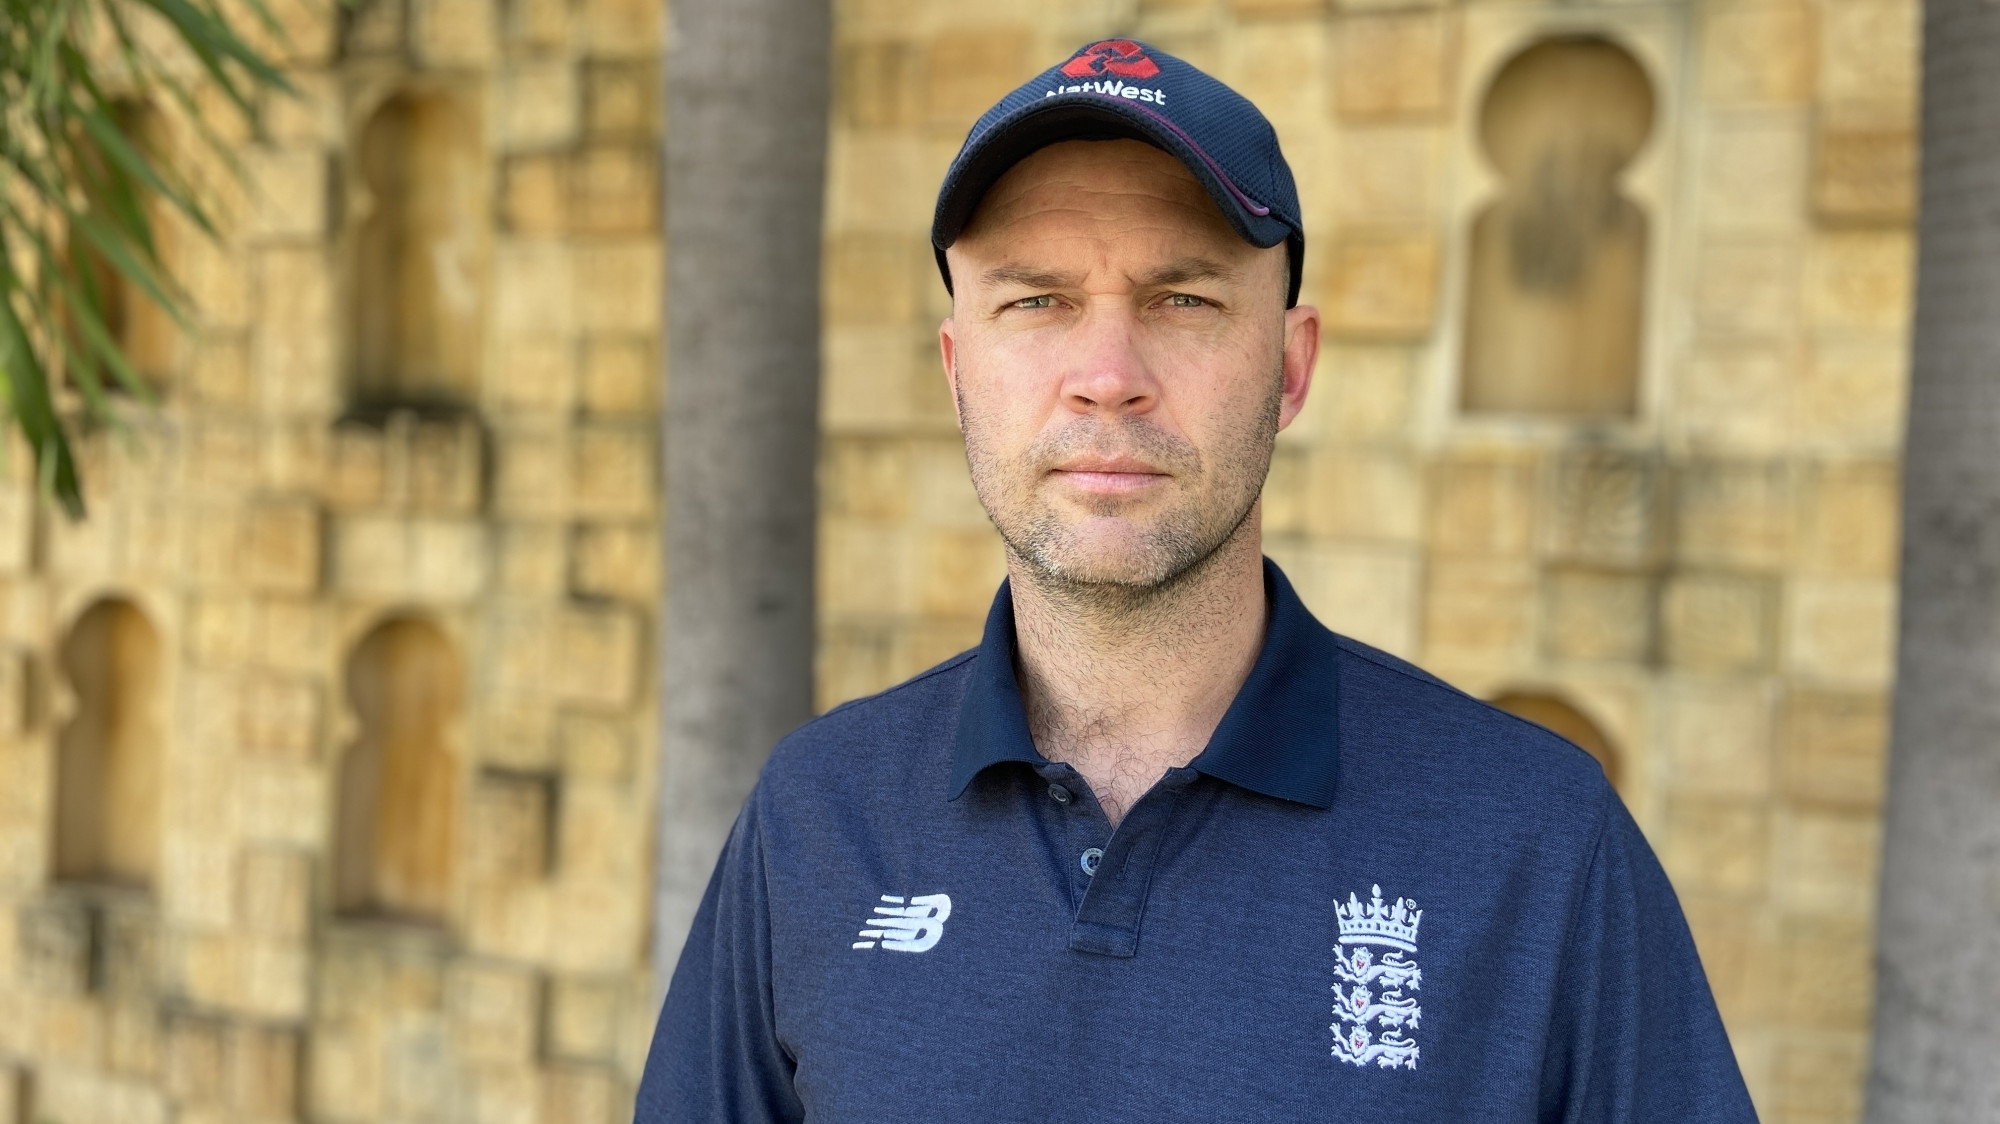 IND v ENG 2021: Big runs in first innings and countering spin well key in India, says Jonathan Trott